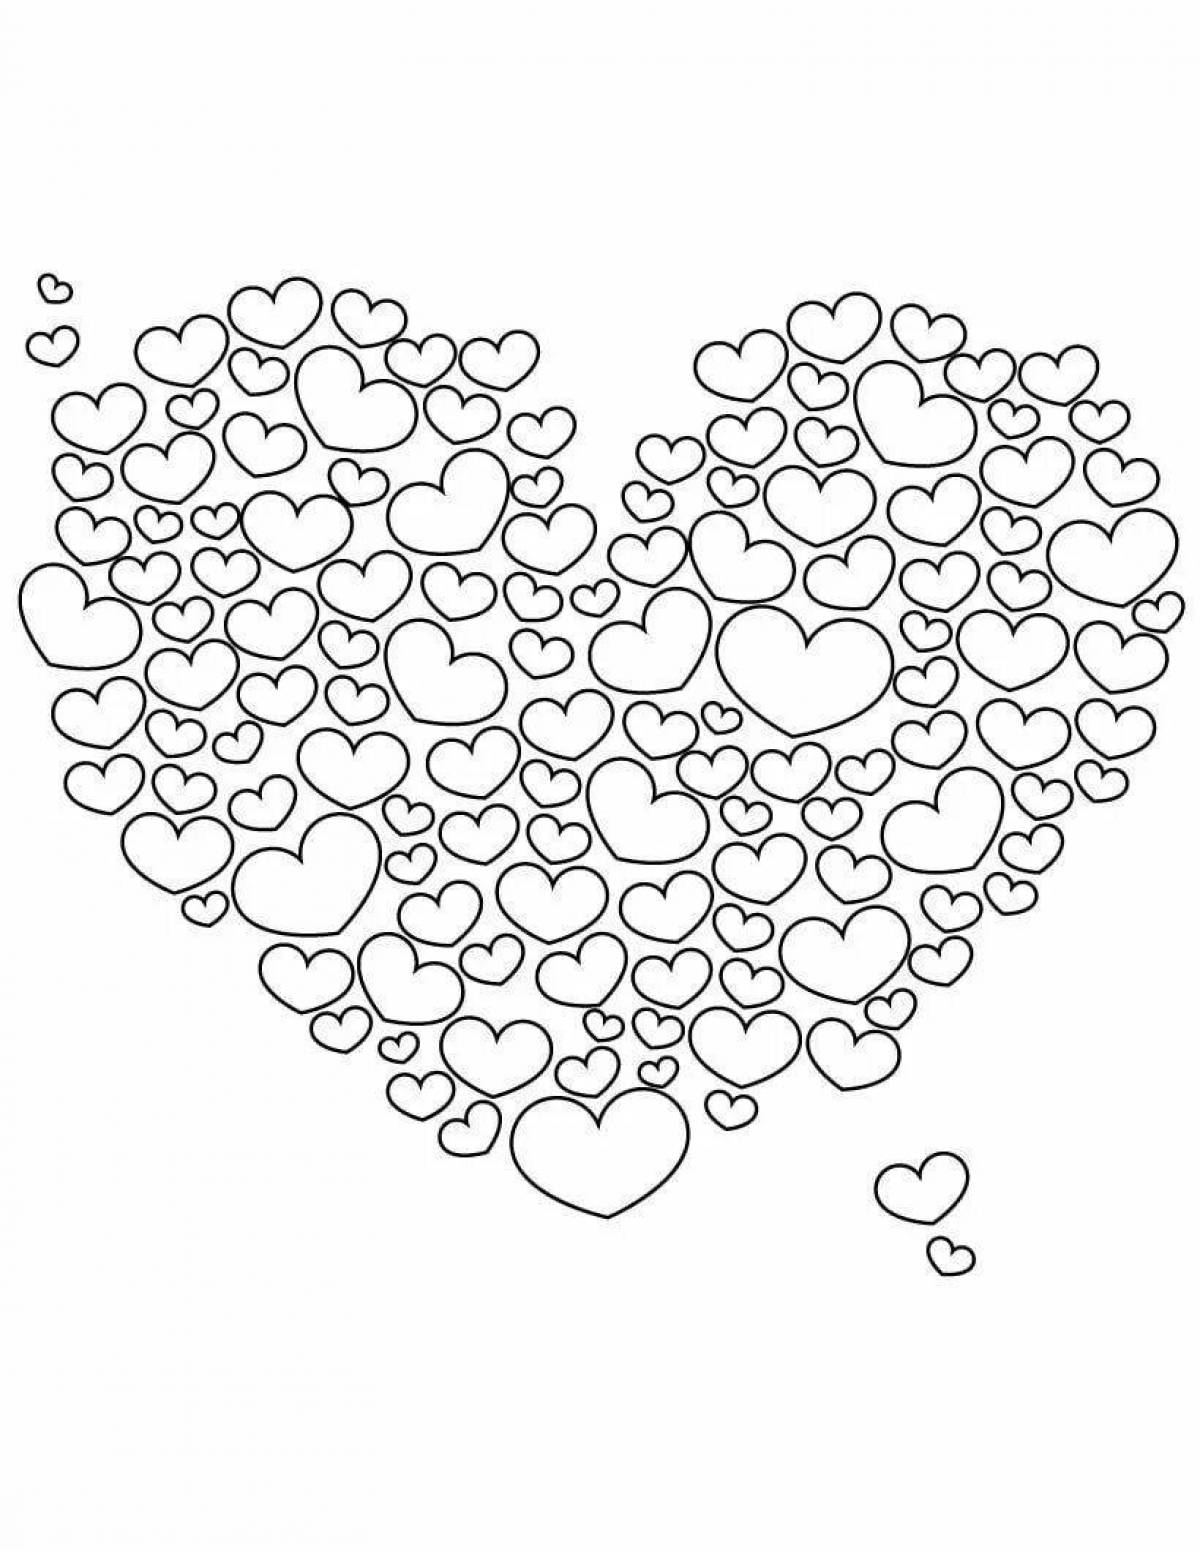 Playful heart coloring page for 5-6 year olds